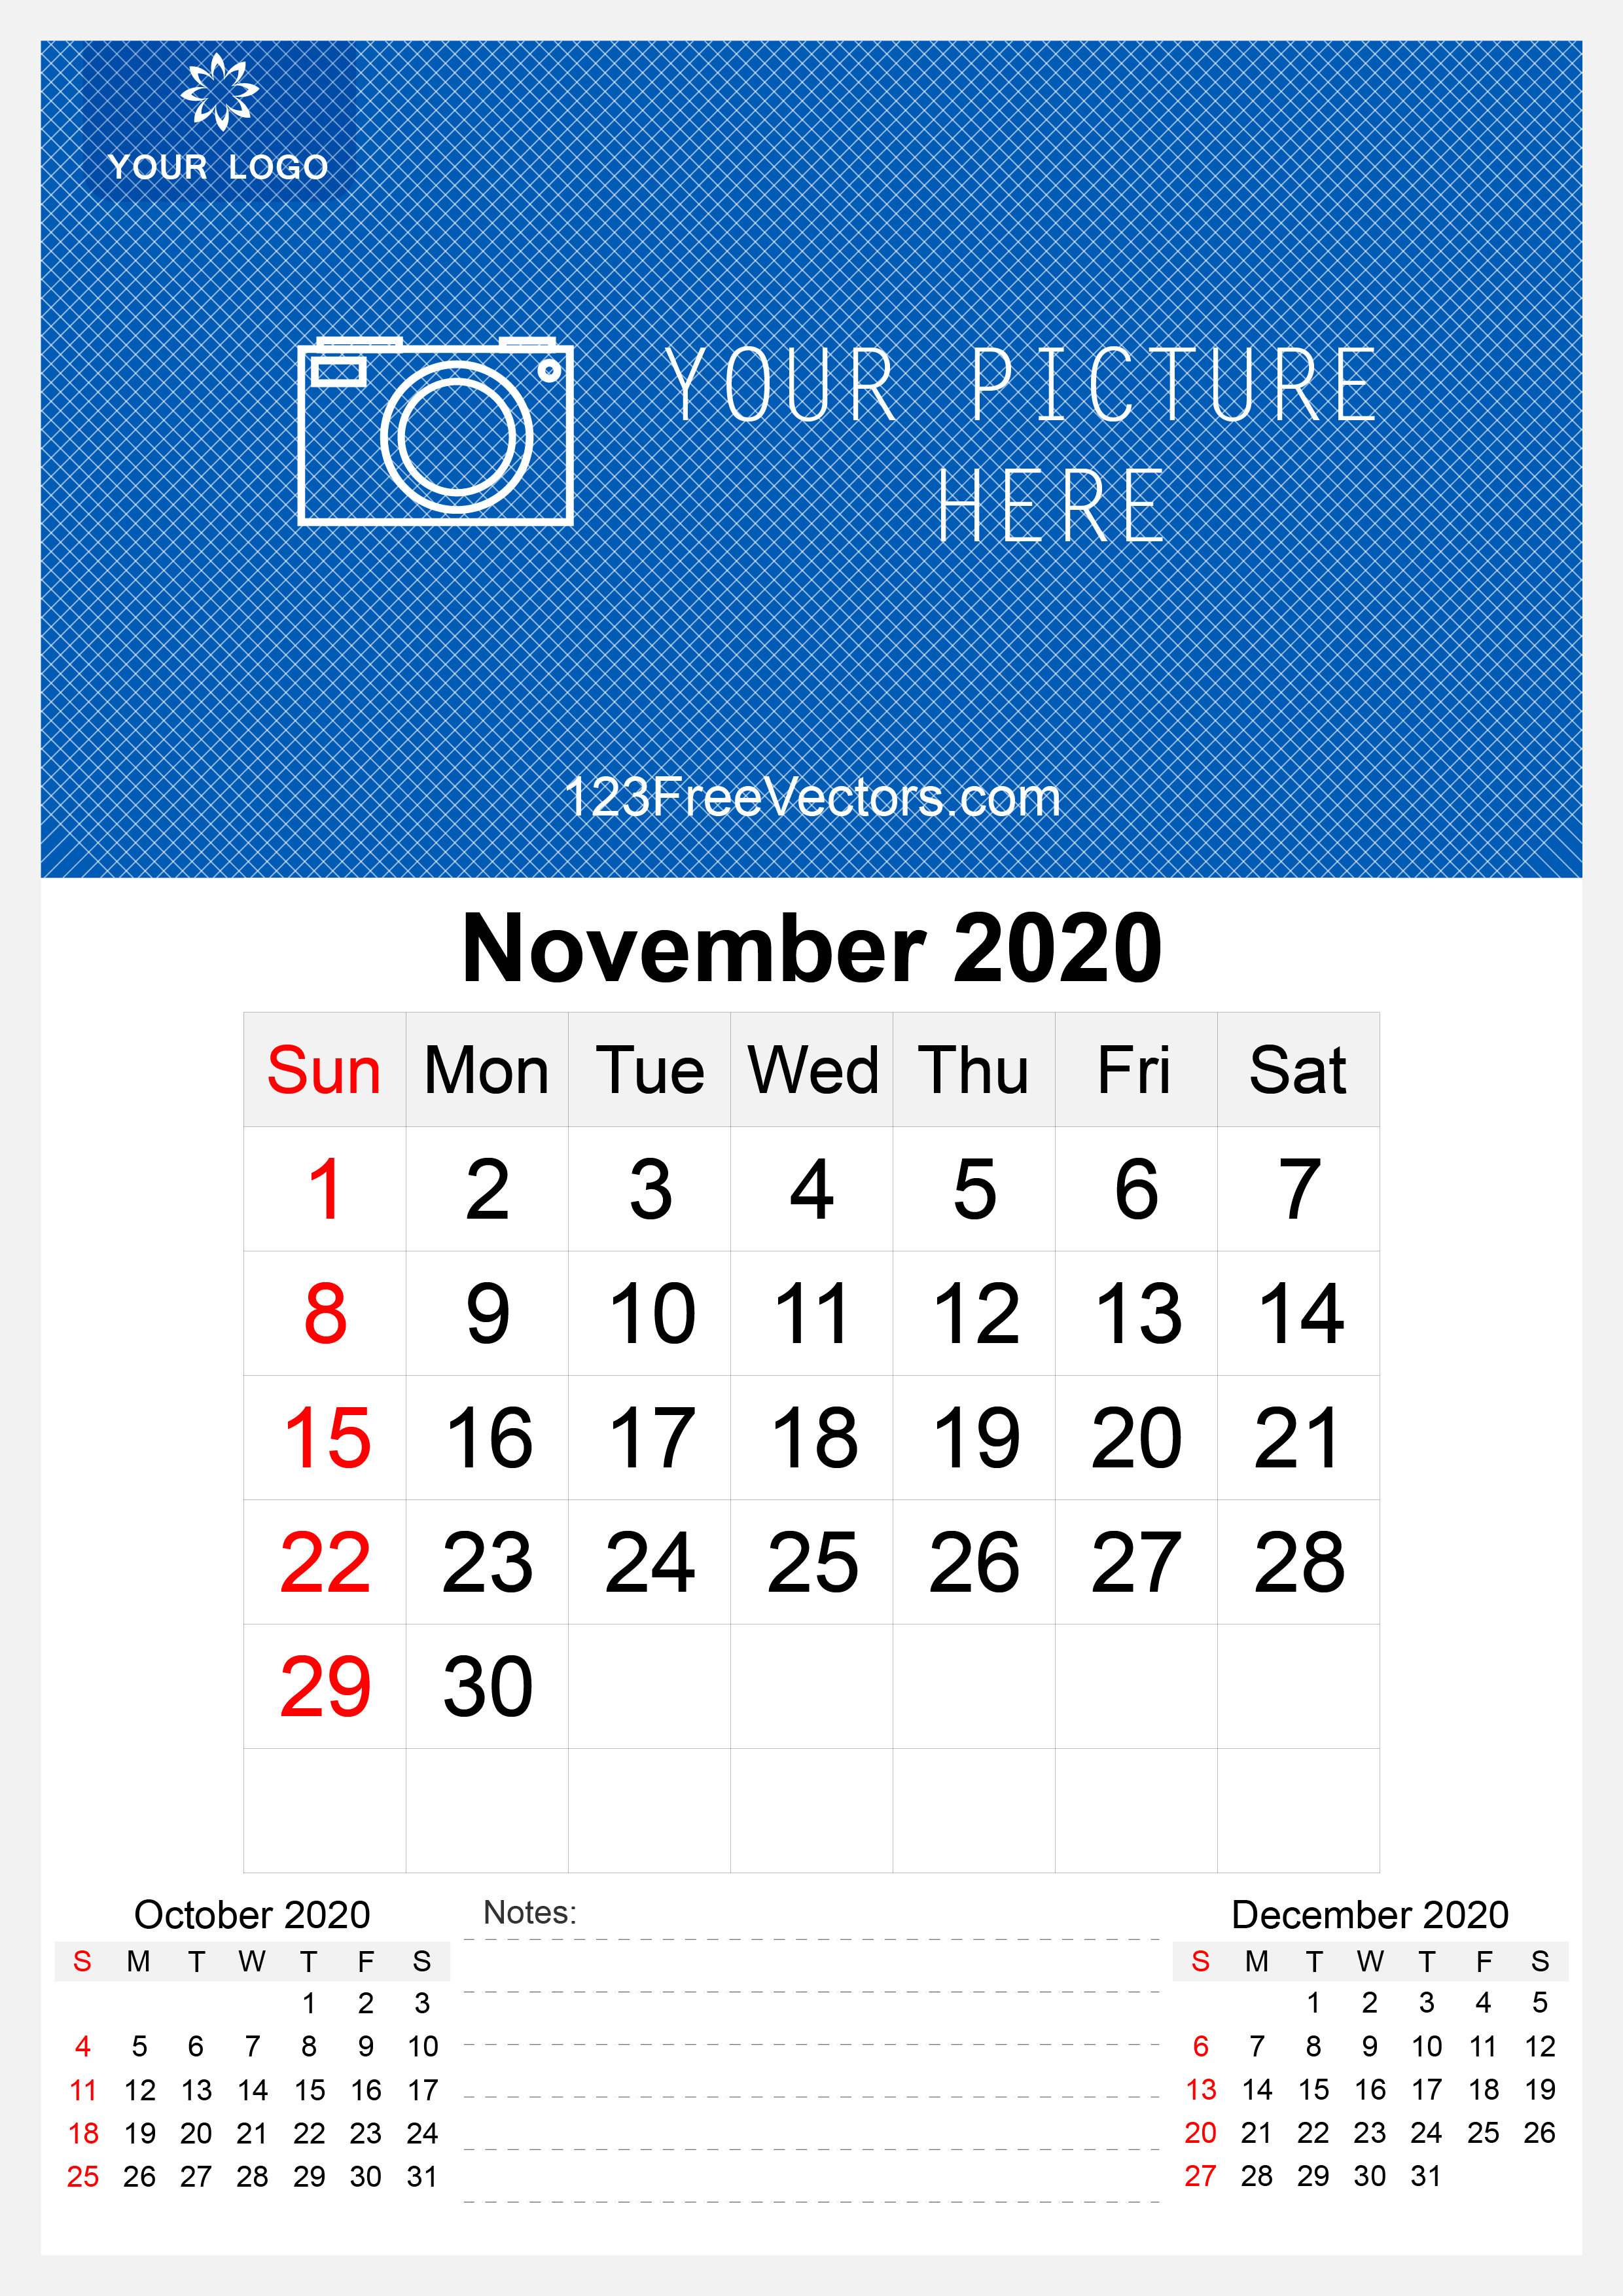 Novemberclipart | Free Vector Graphics | 123Freevectors within November 2020 Clipart